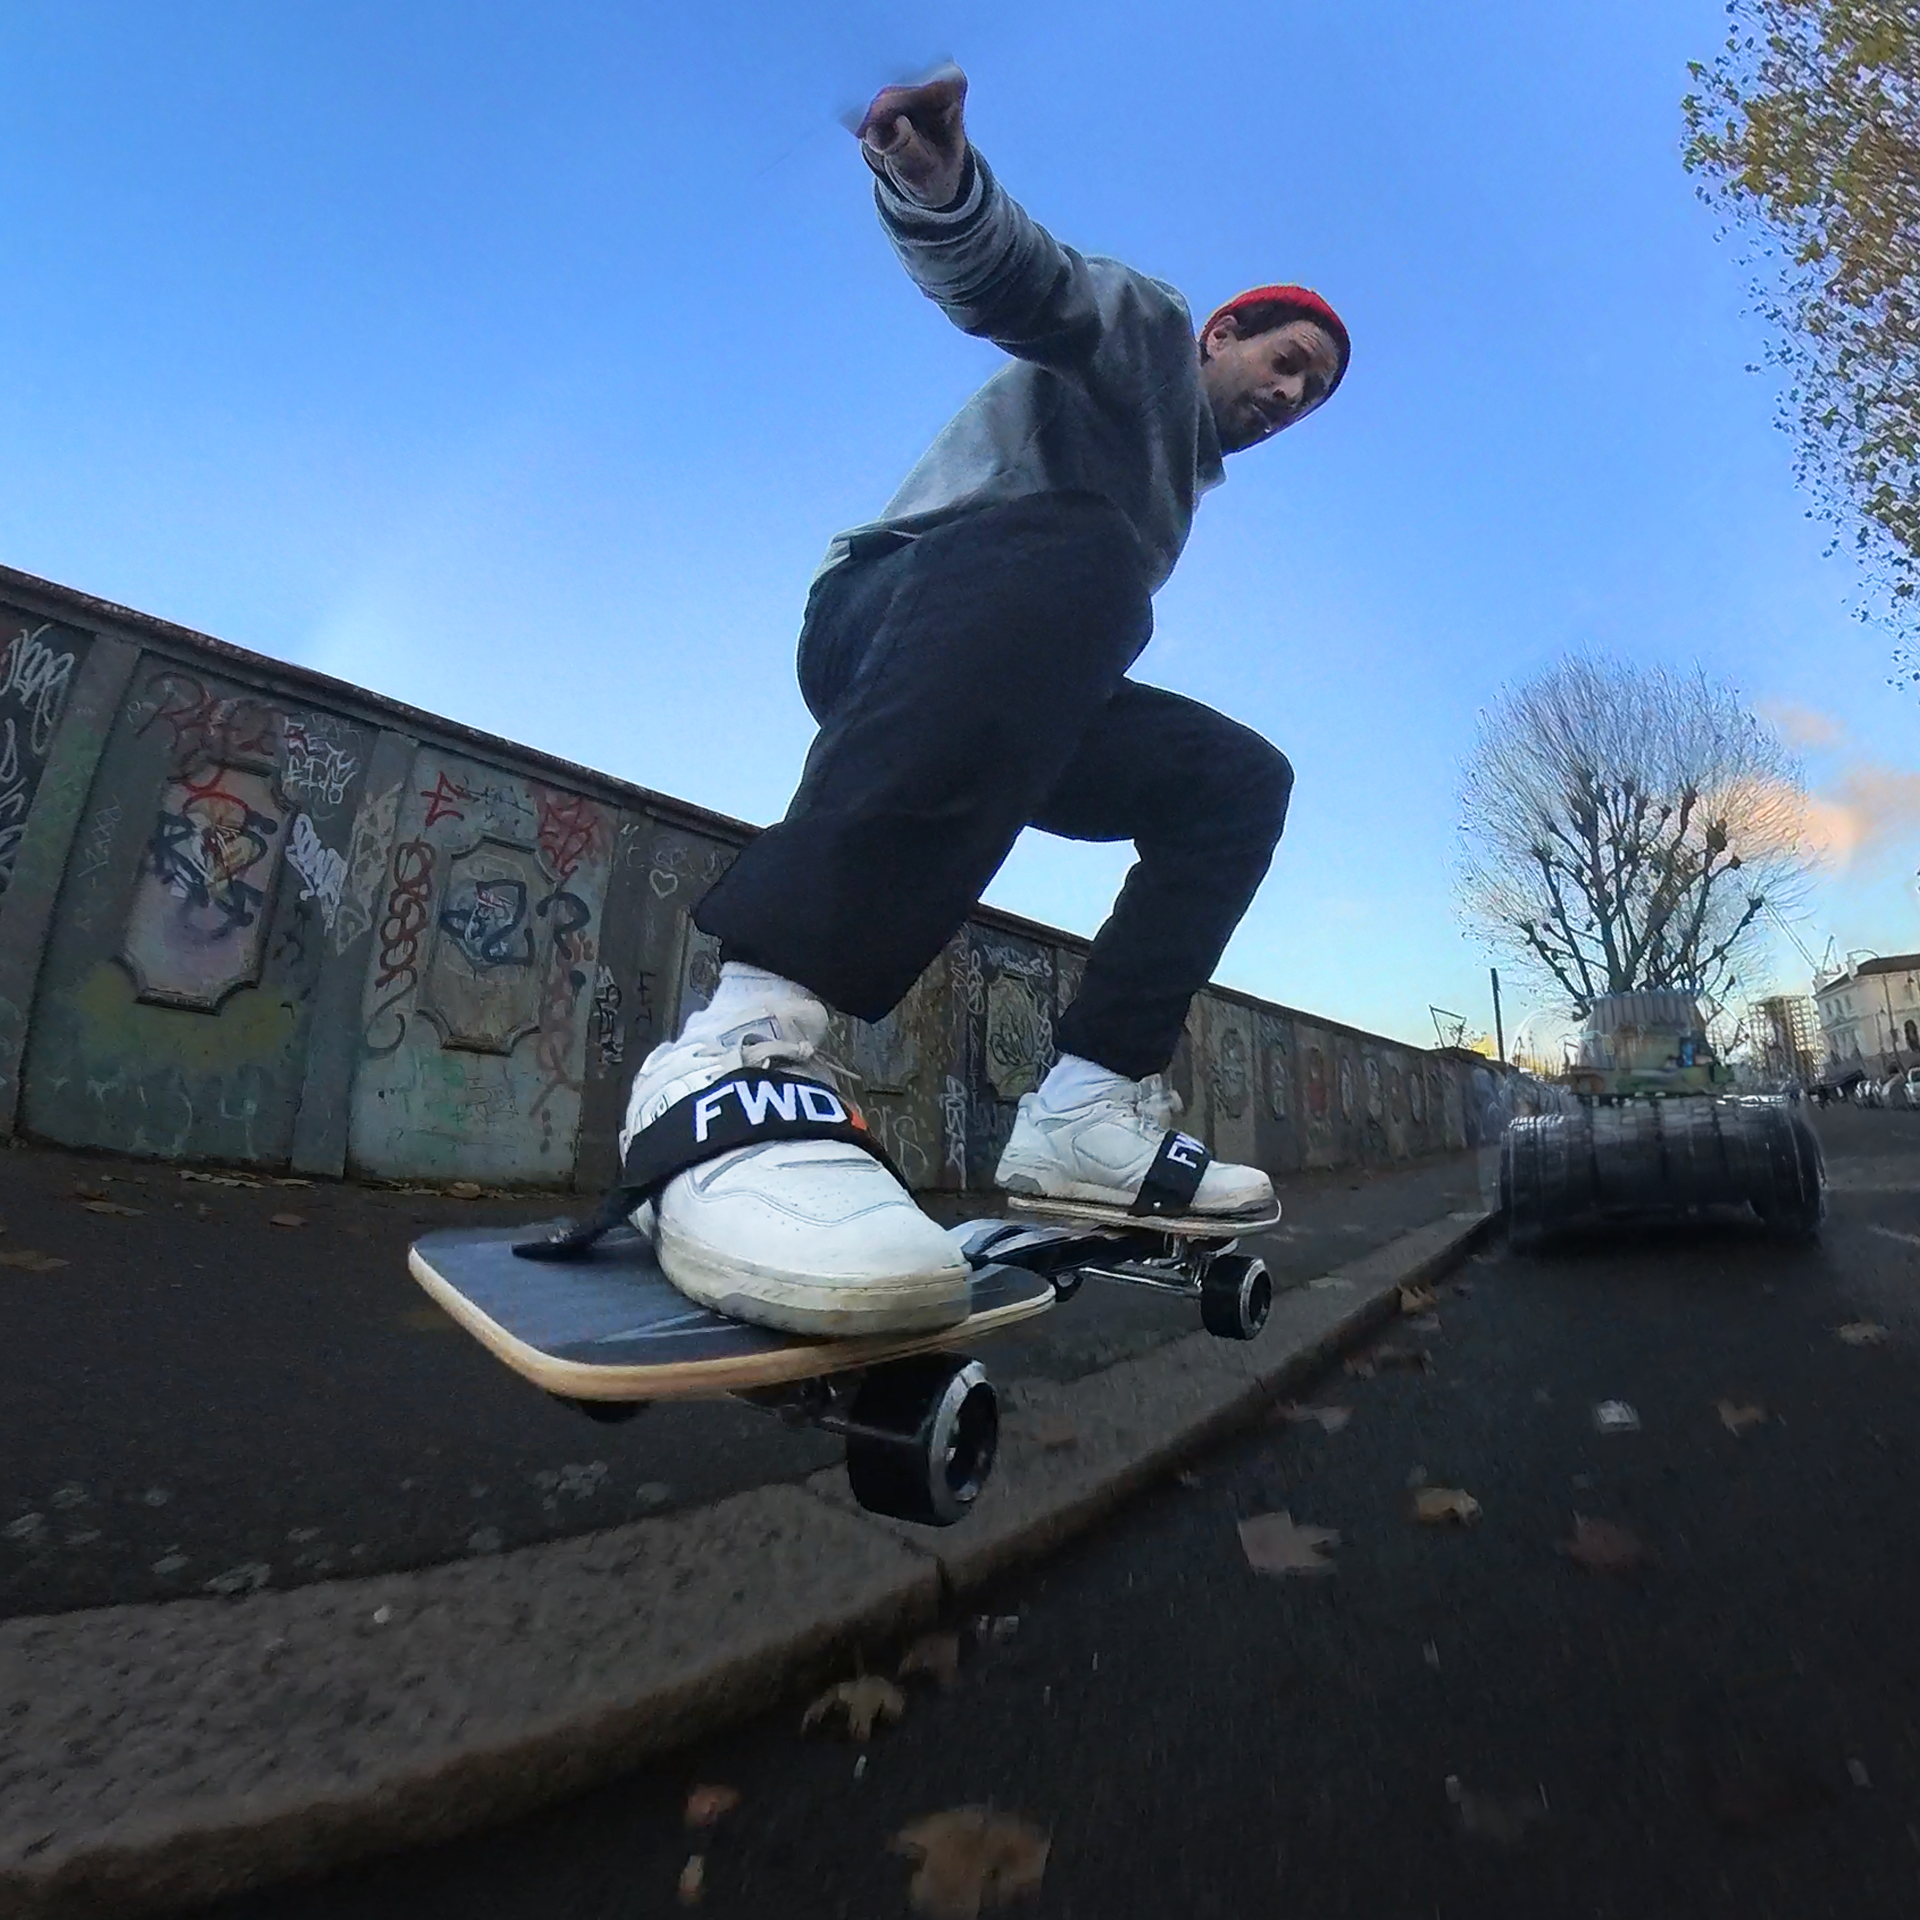 Jumping off a curb in London on a Snakeboard